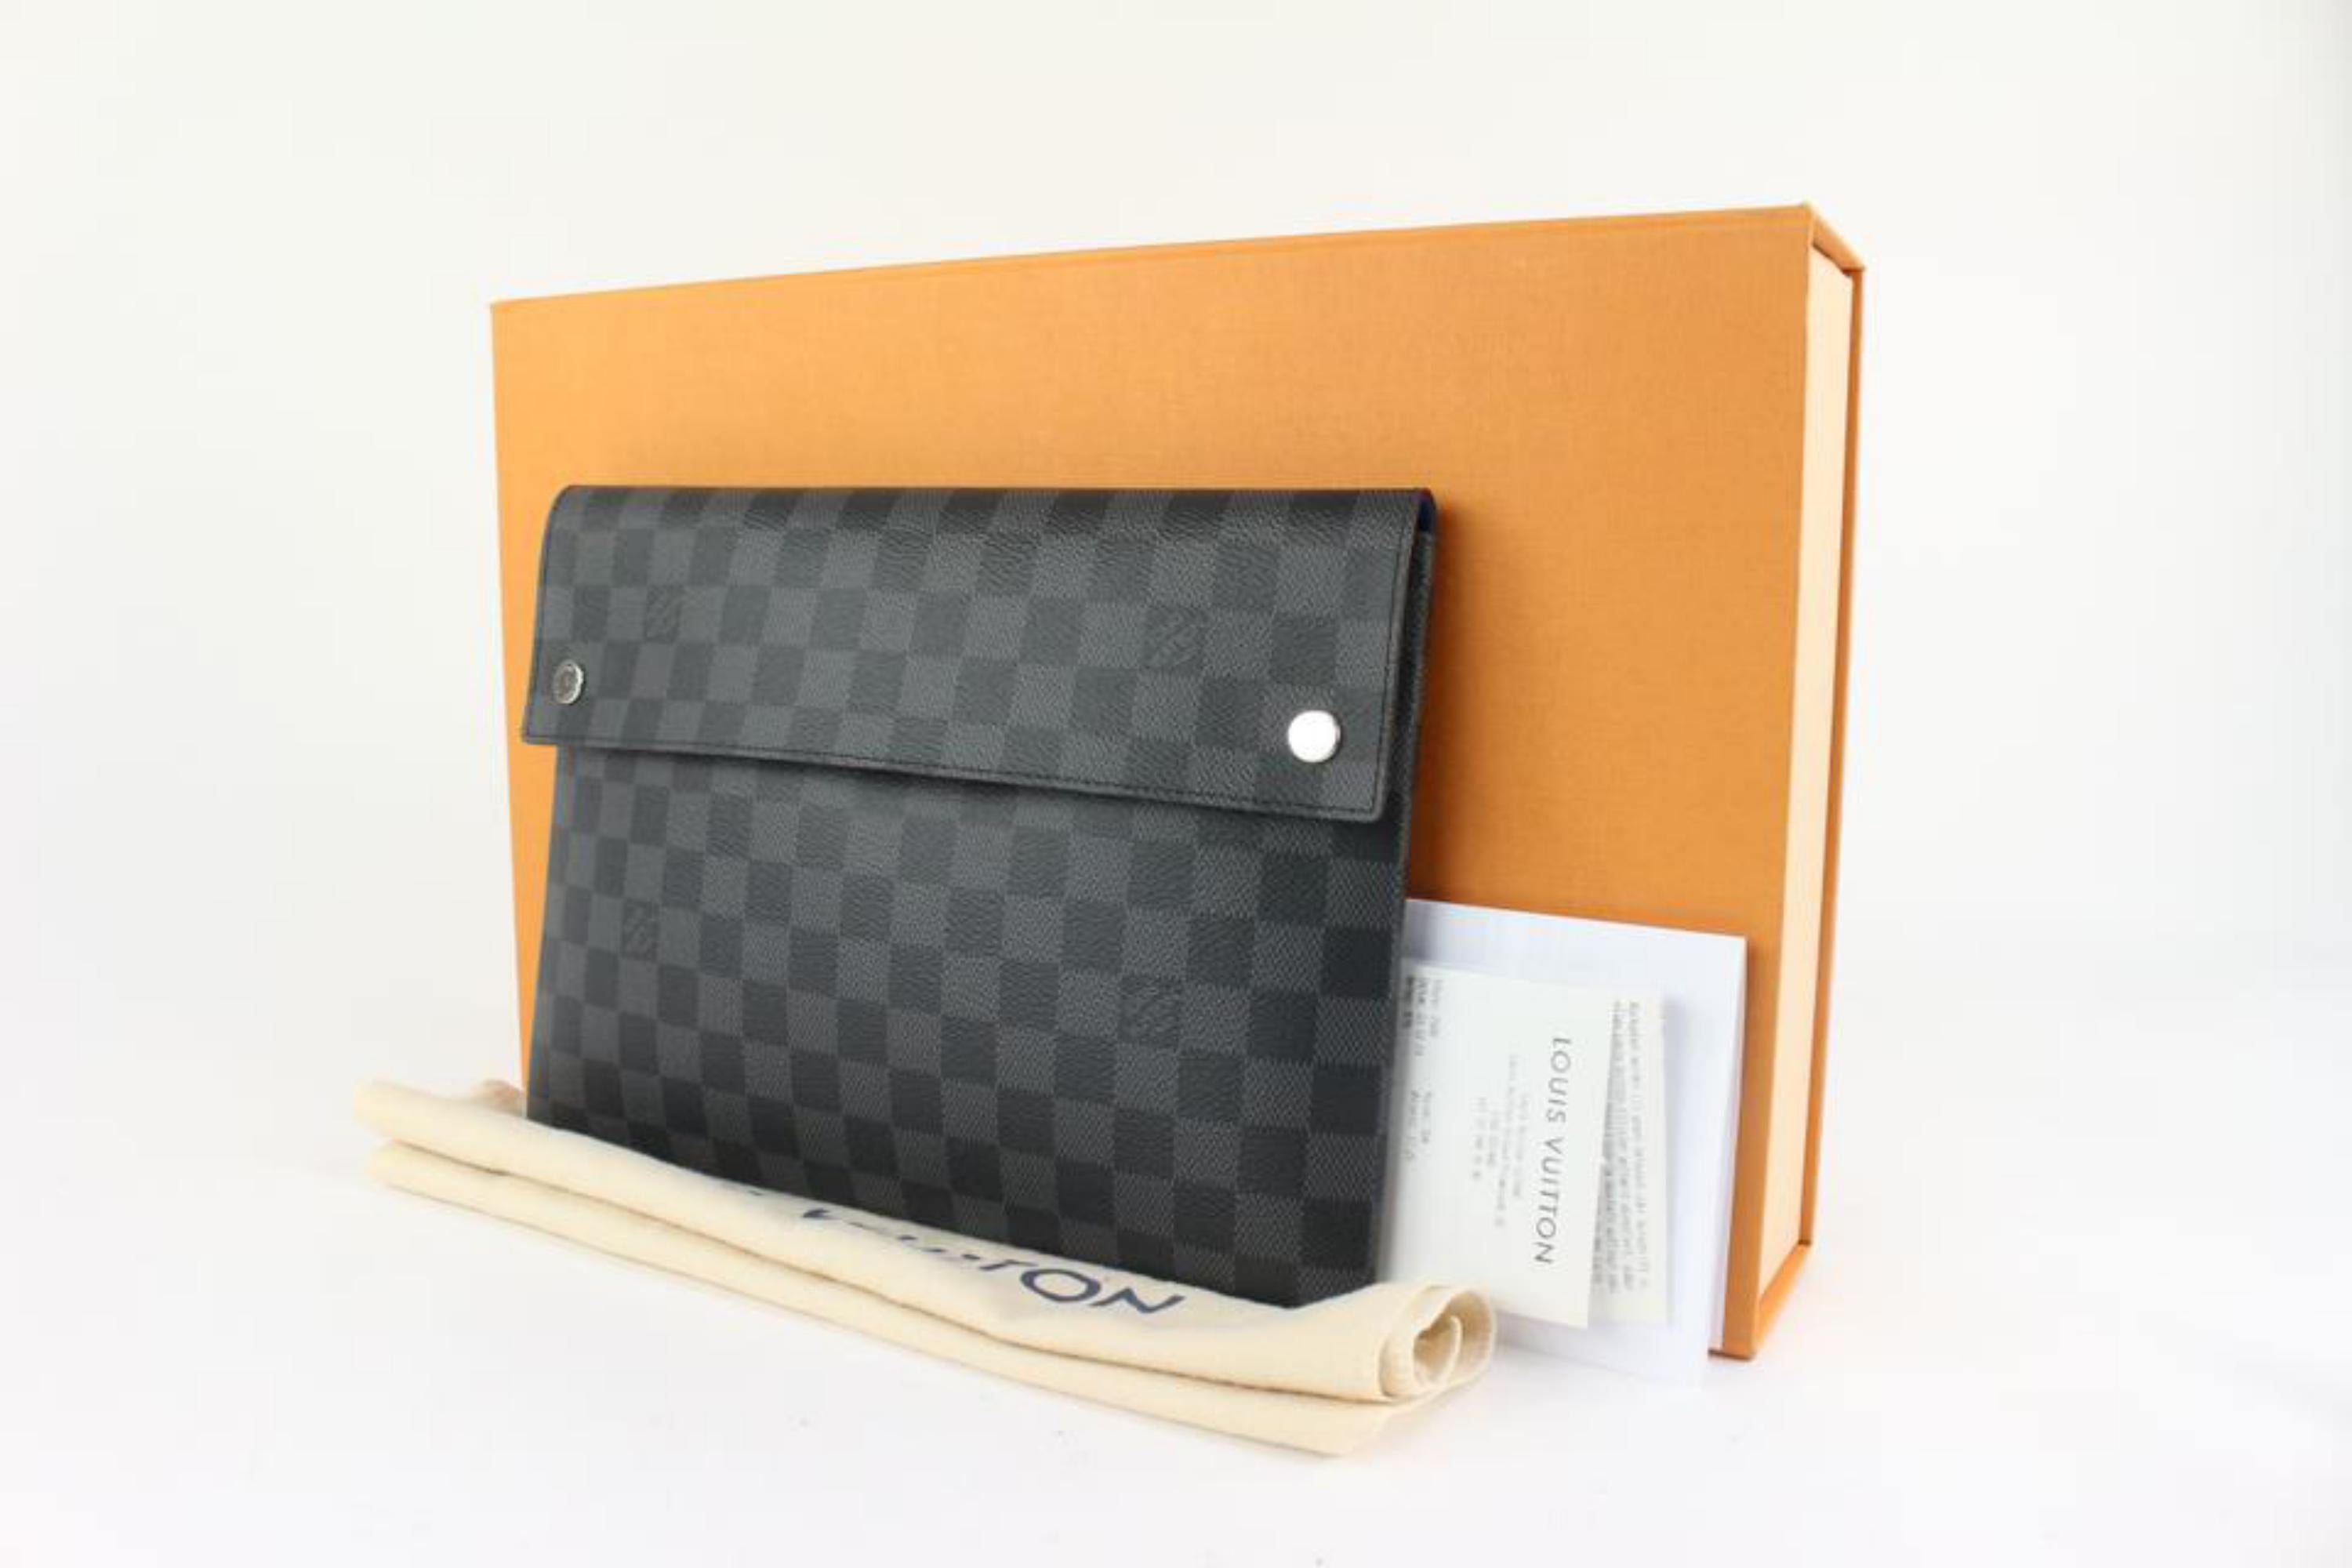 Louis Vuitton Damier Graphite Alpha Pochette GM Portfolio Toiletry Pouch 217lv28
Date Code/Serial Number: RA3119
Made In: France
Measurements: Length:  10.75